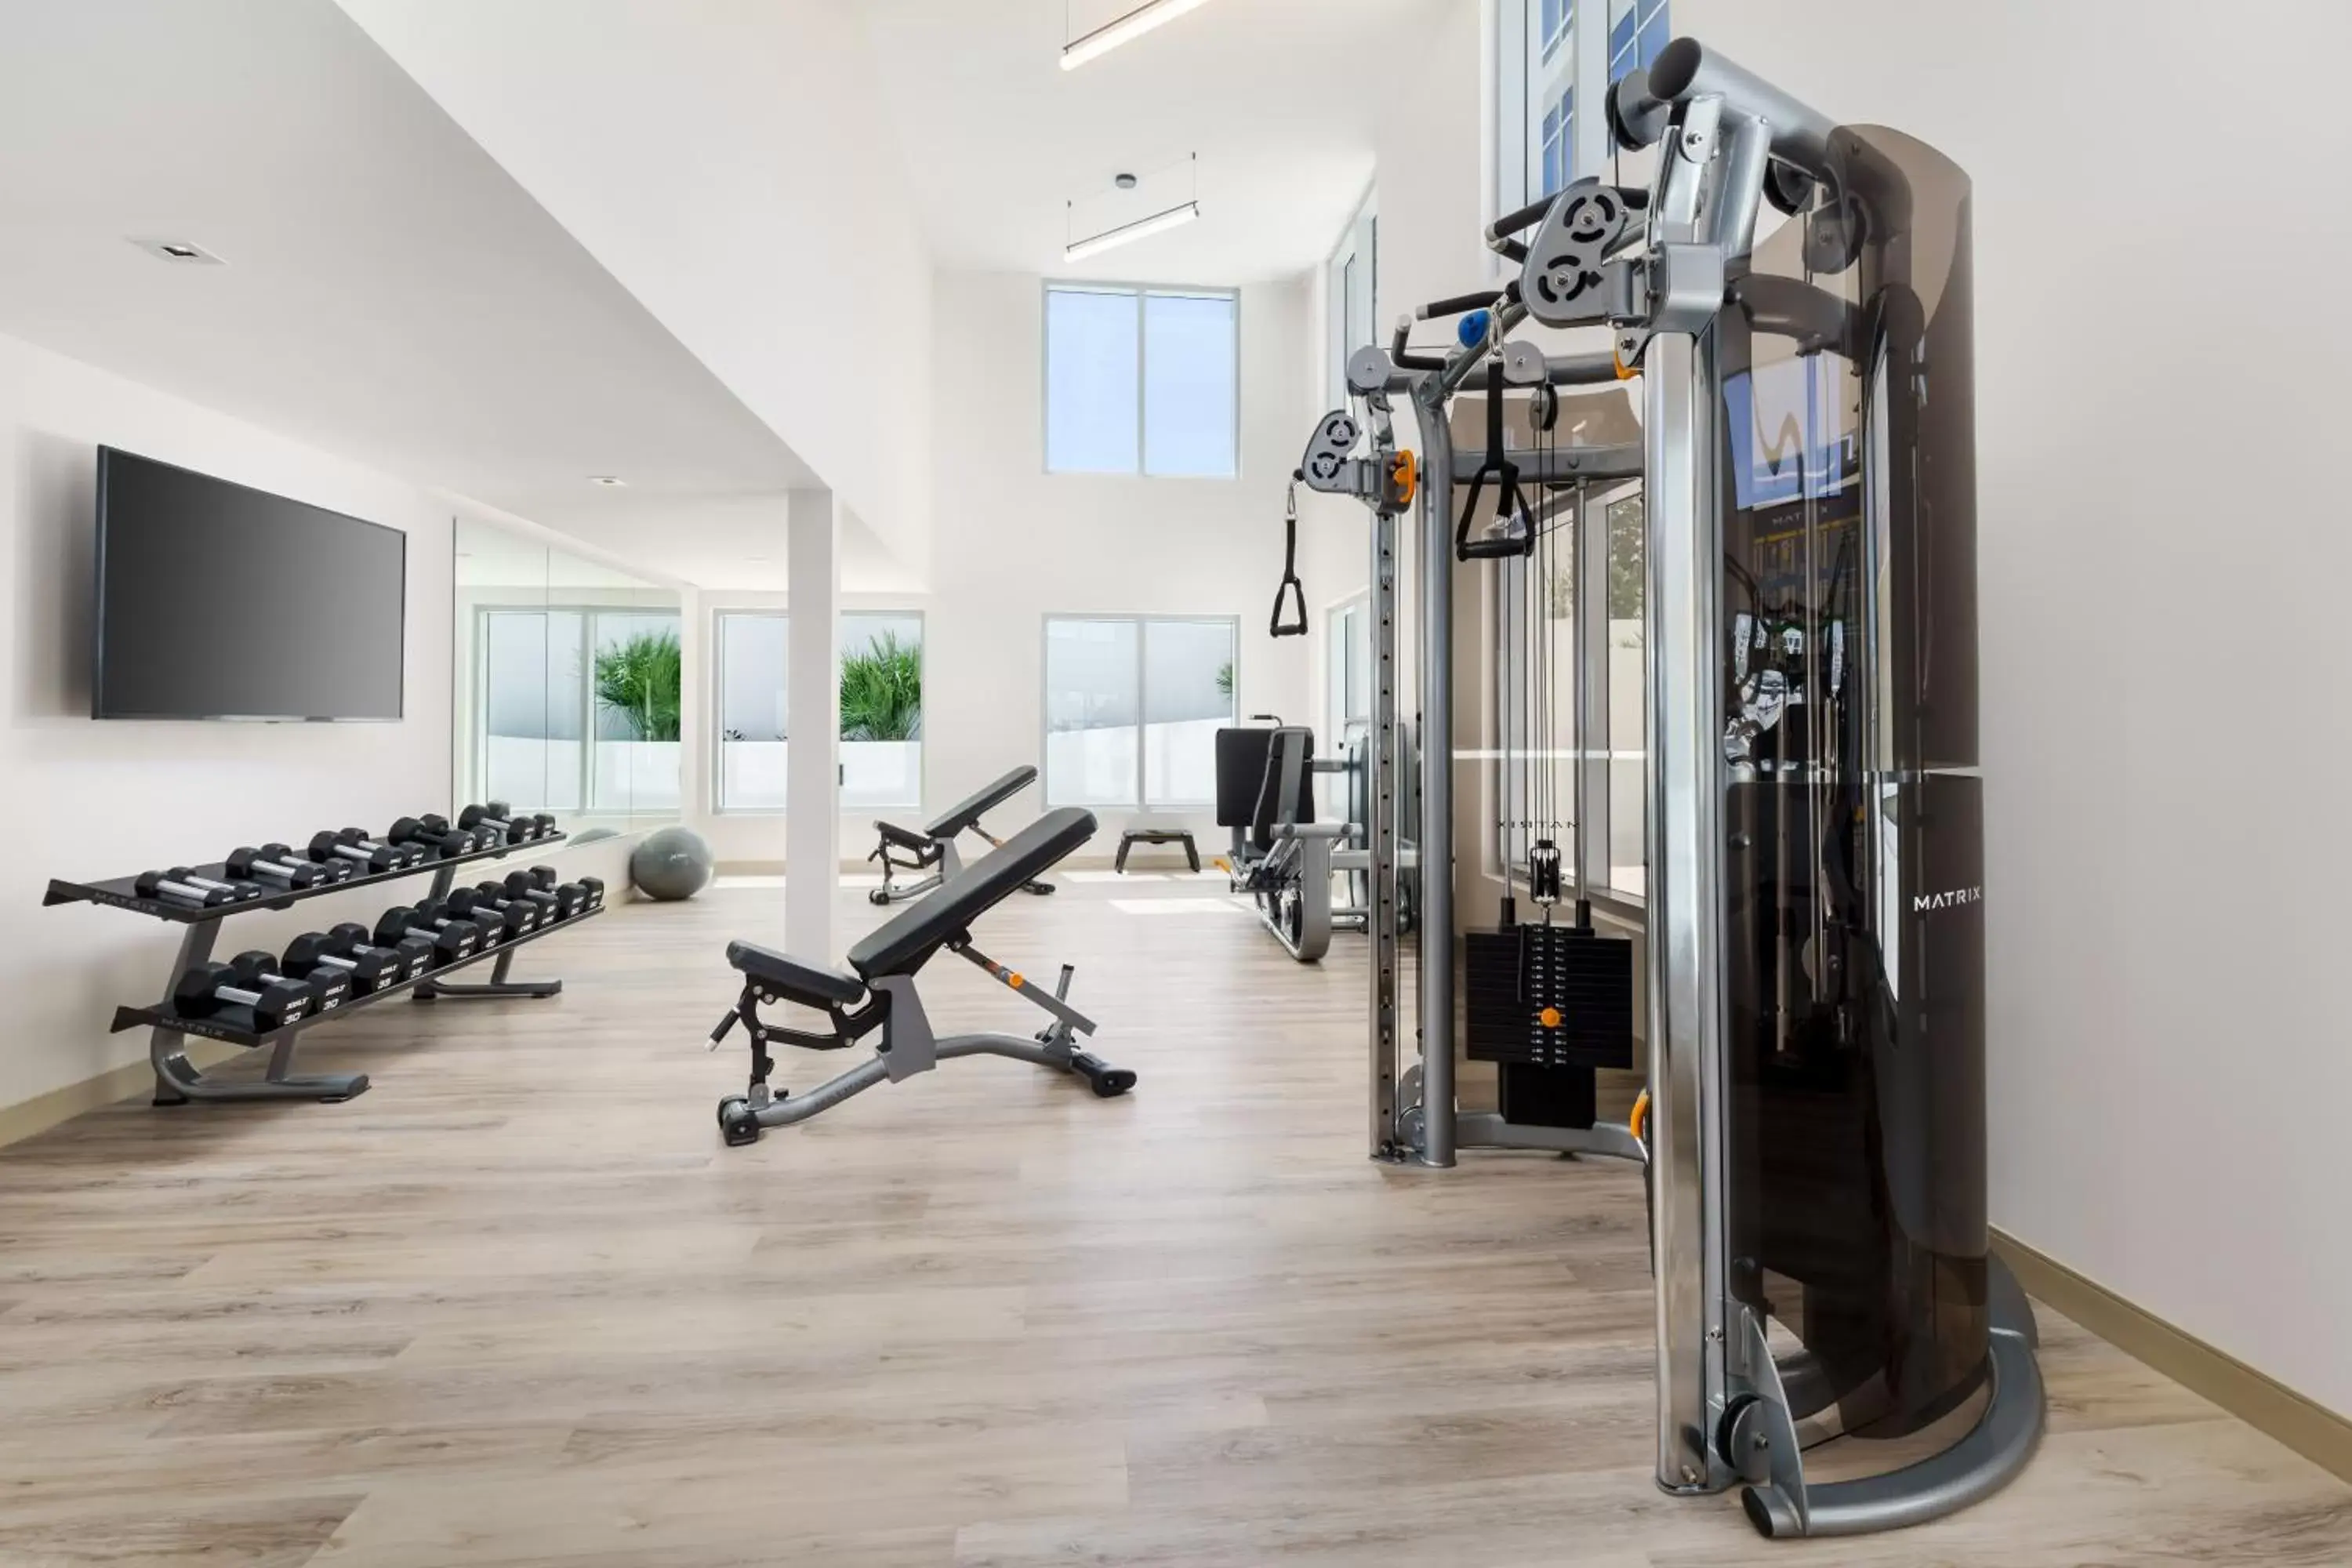 Fitness centre/facilities, Fitness Center/Facilities in AC Hotel St Petersburg Downtown